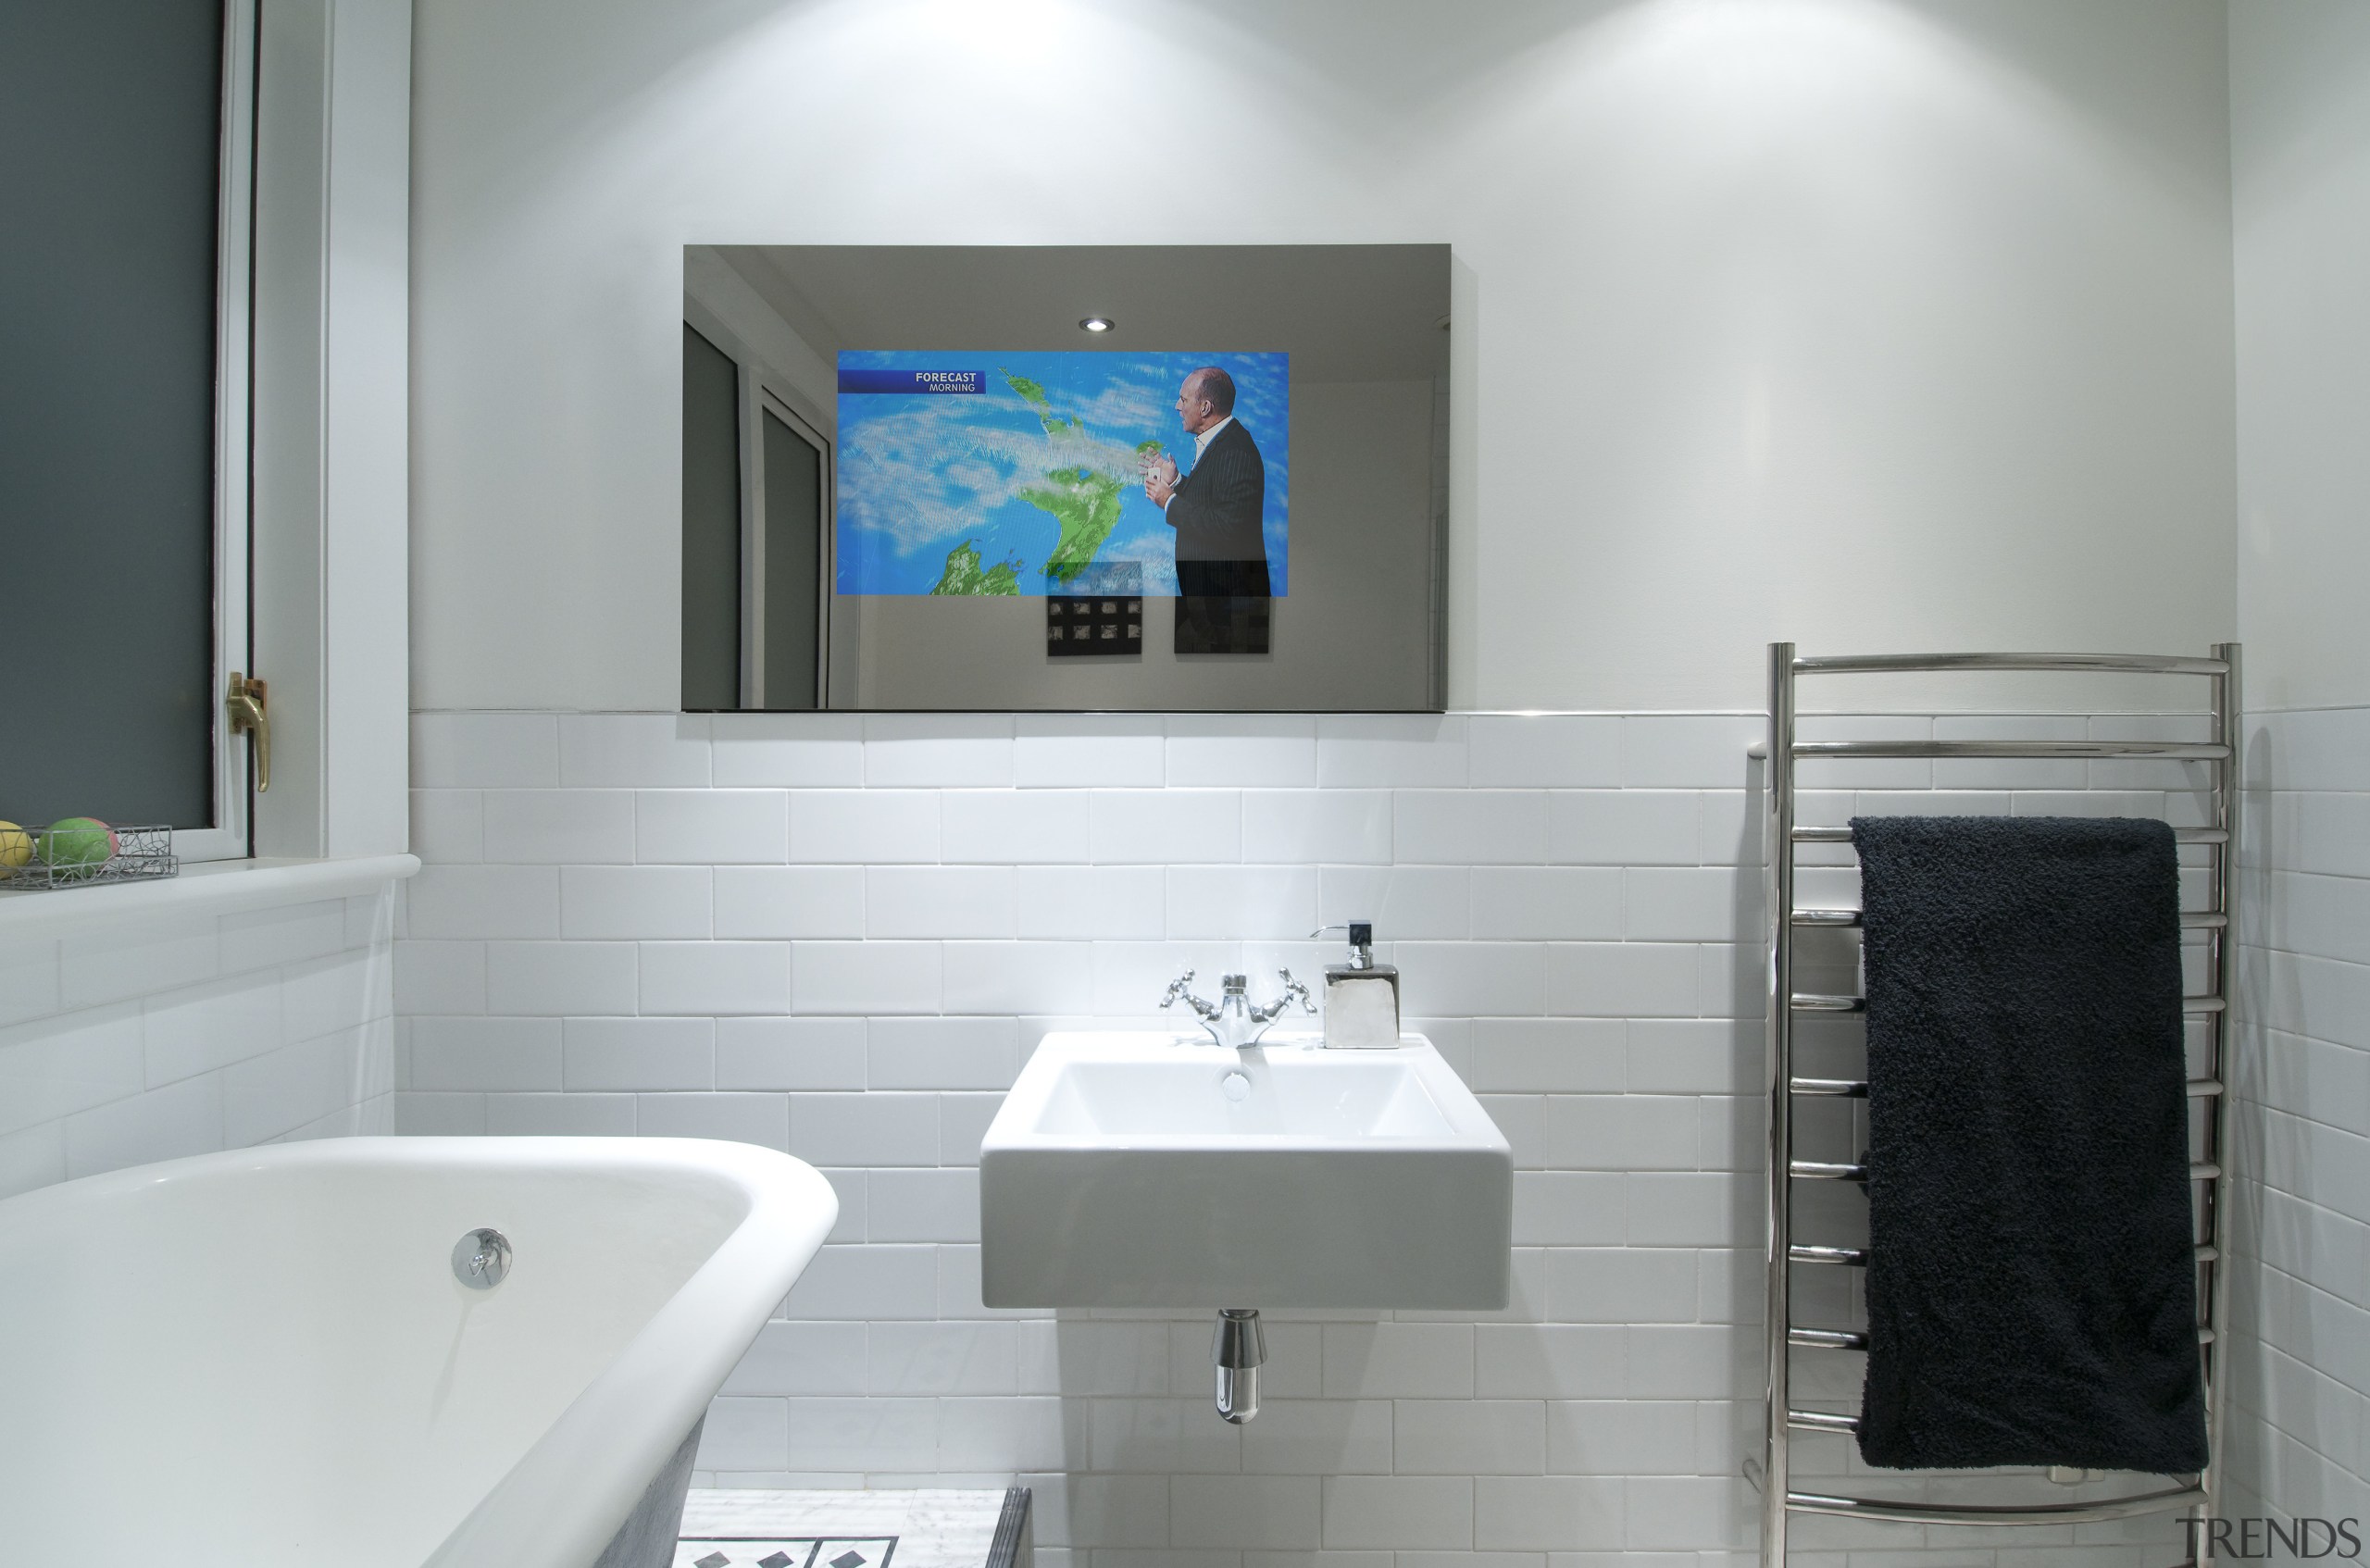 View of white bathroom and waterproof LCD television bathroom, bathroom accessory, home, interior design, product design, room, sink, gray